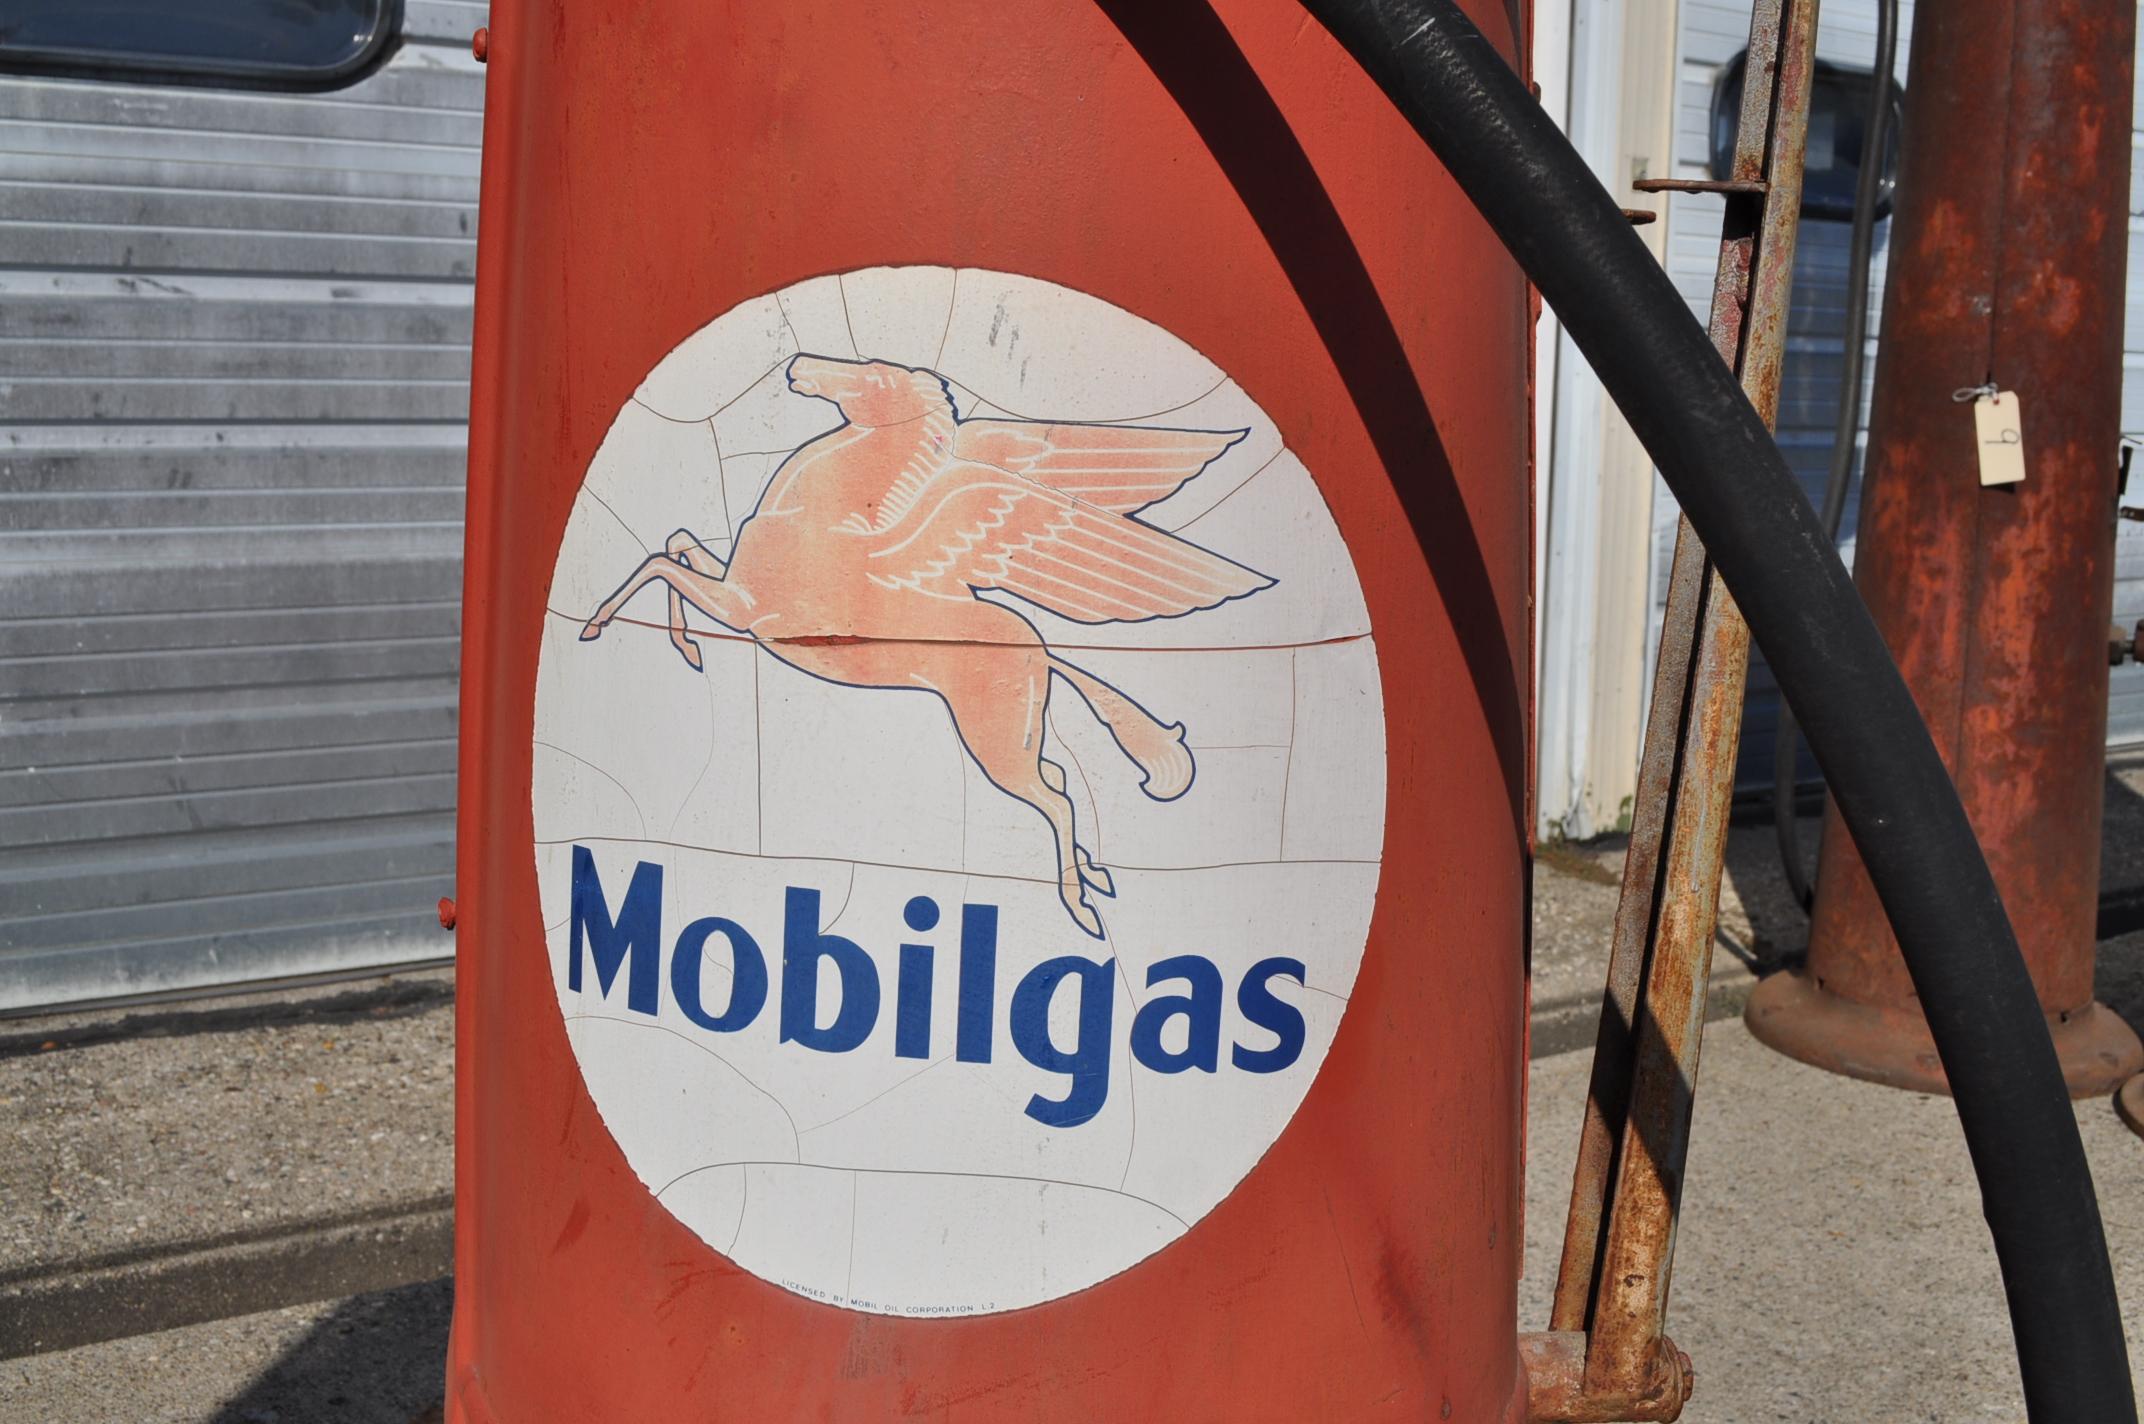 Gilbert and Barker 10 Gallon Visible Gas Pump With Mobilgas Sticker